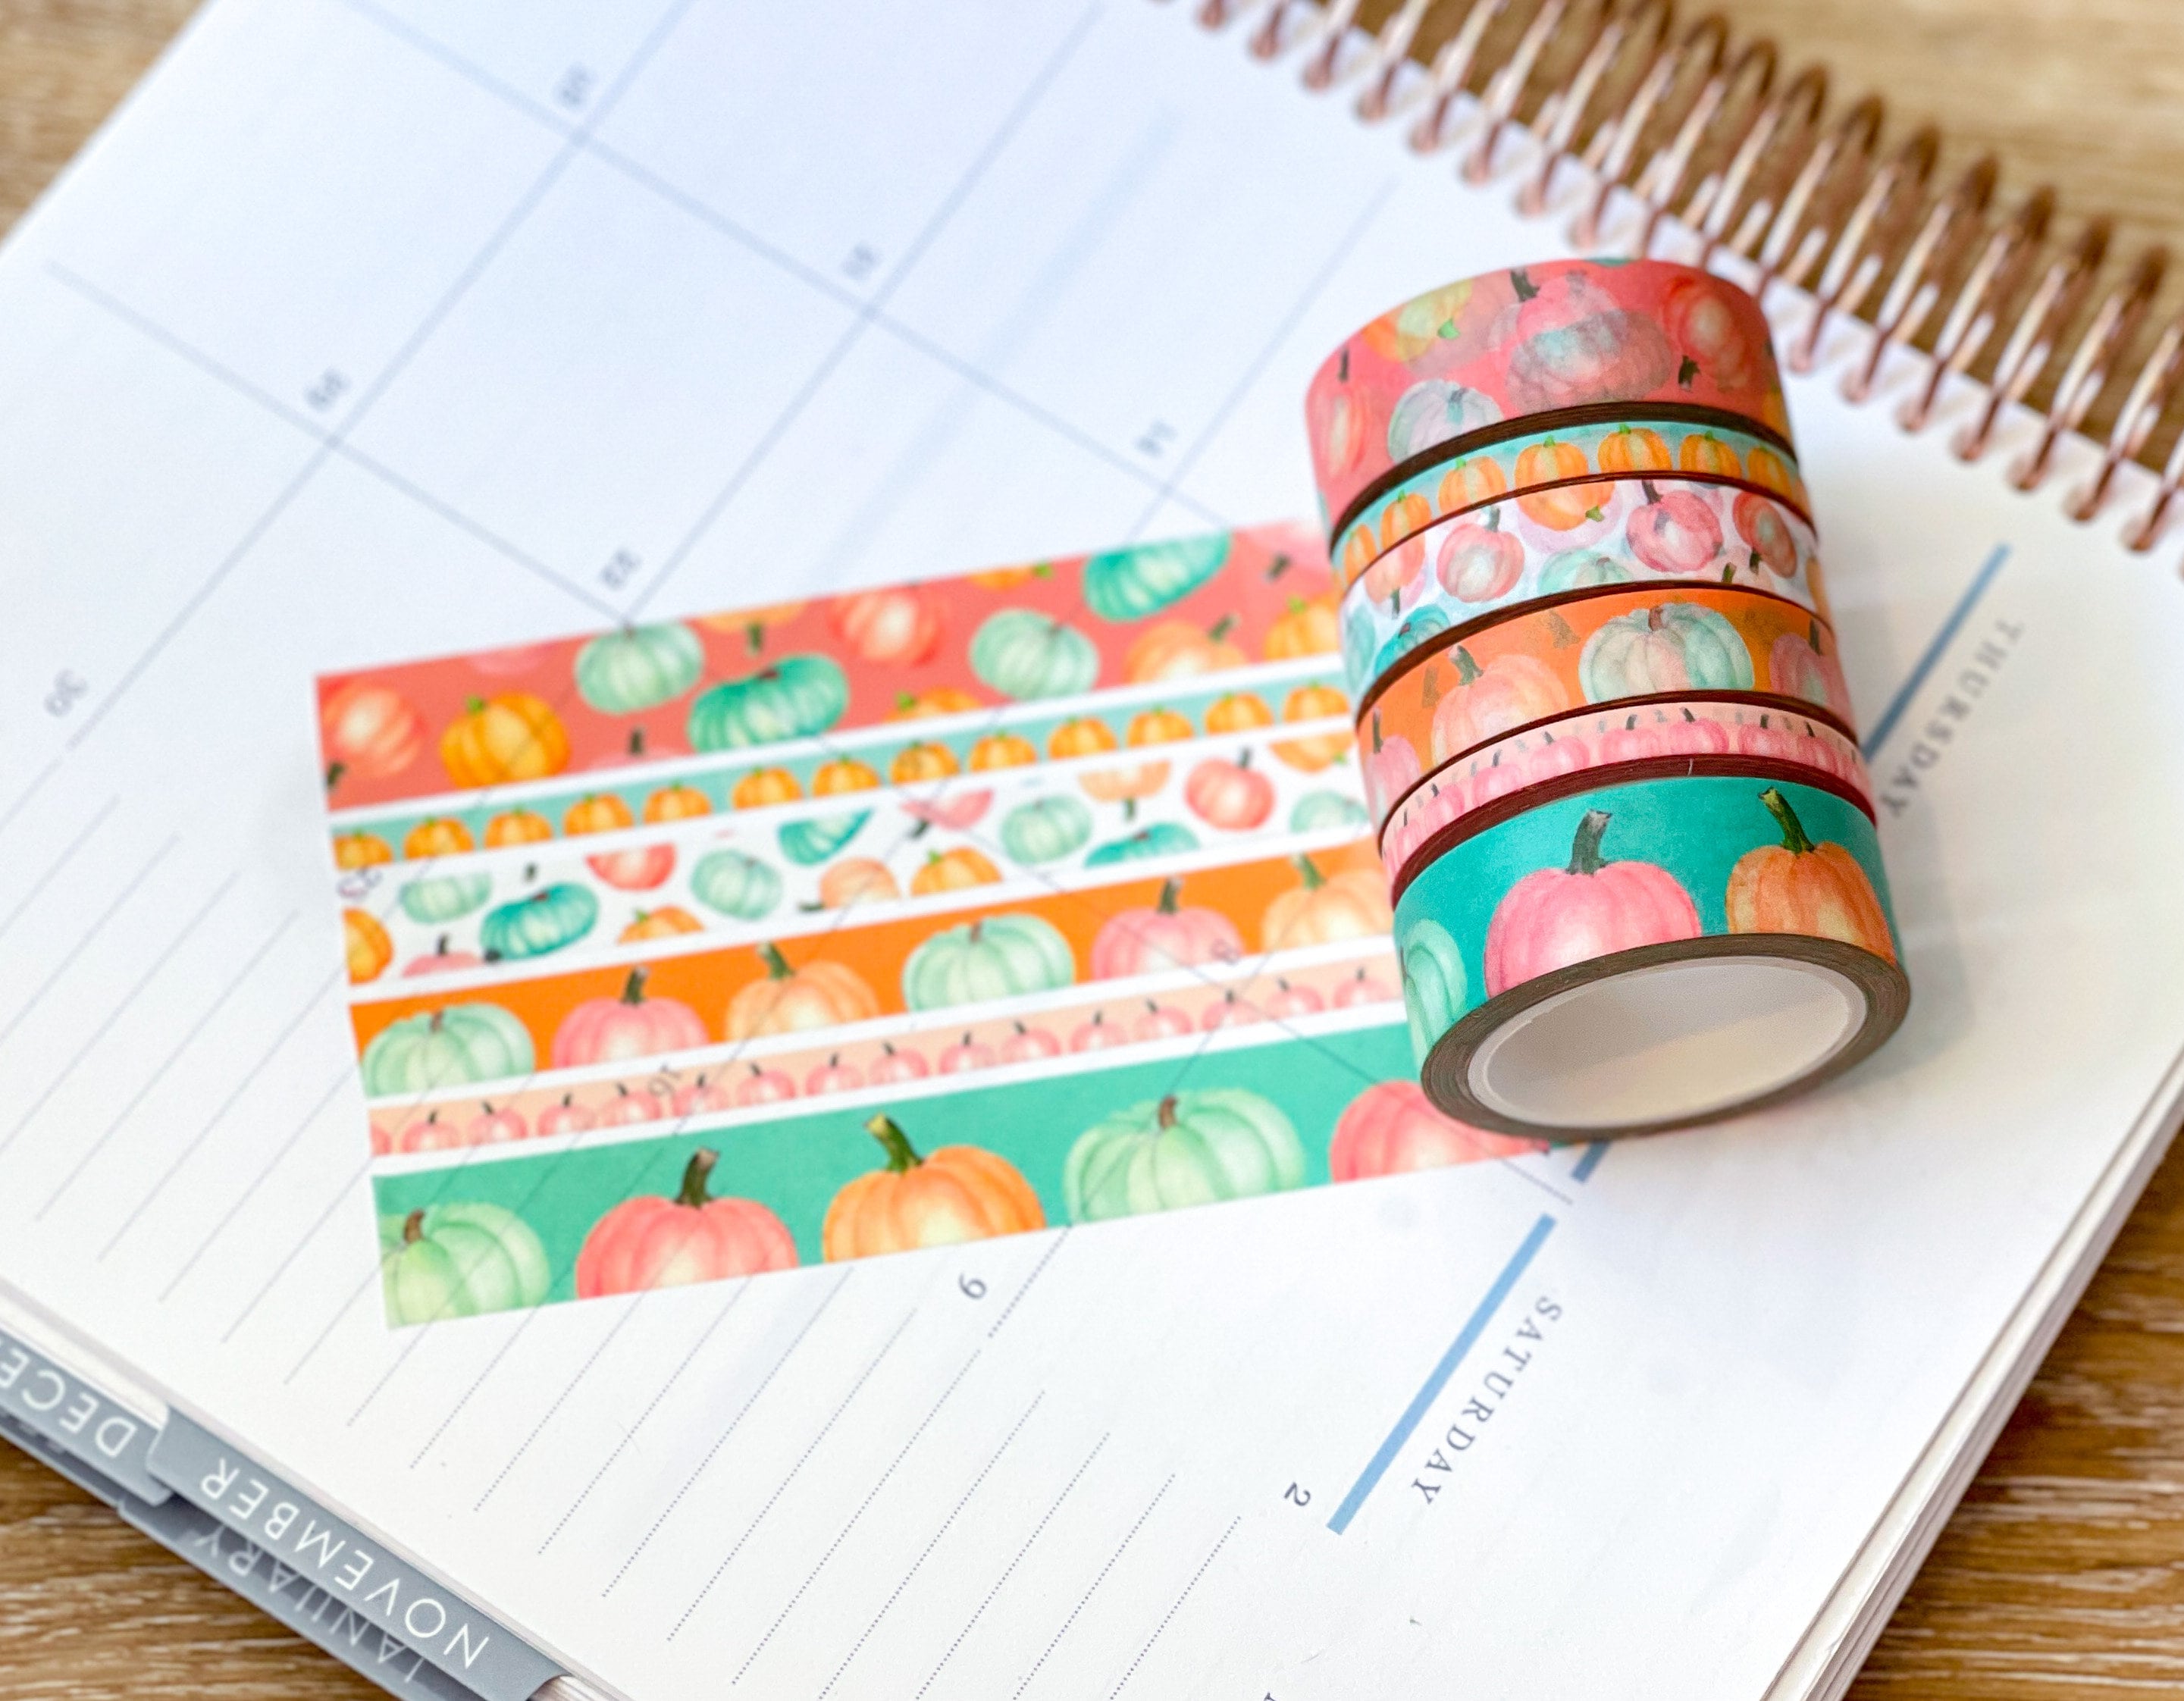 Calendar Dates Washi Tape, Journaling Washi Tapes, Bible Journaling Tape,  Angled Date Washi for Use Any Month BBB Supplies R-AL030-30 